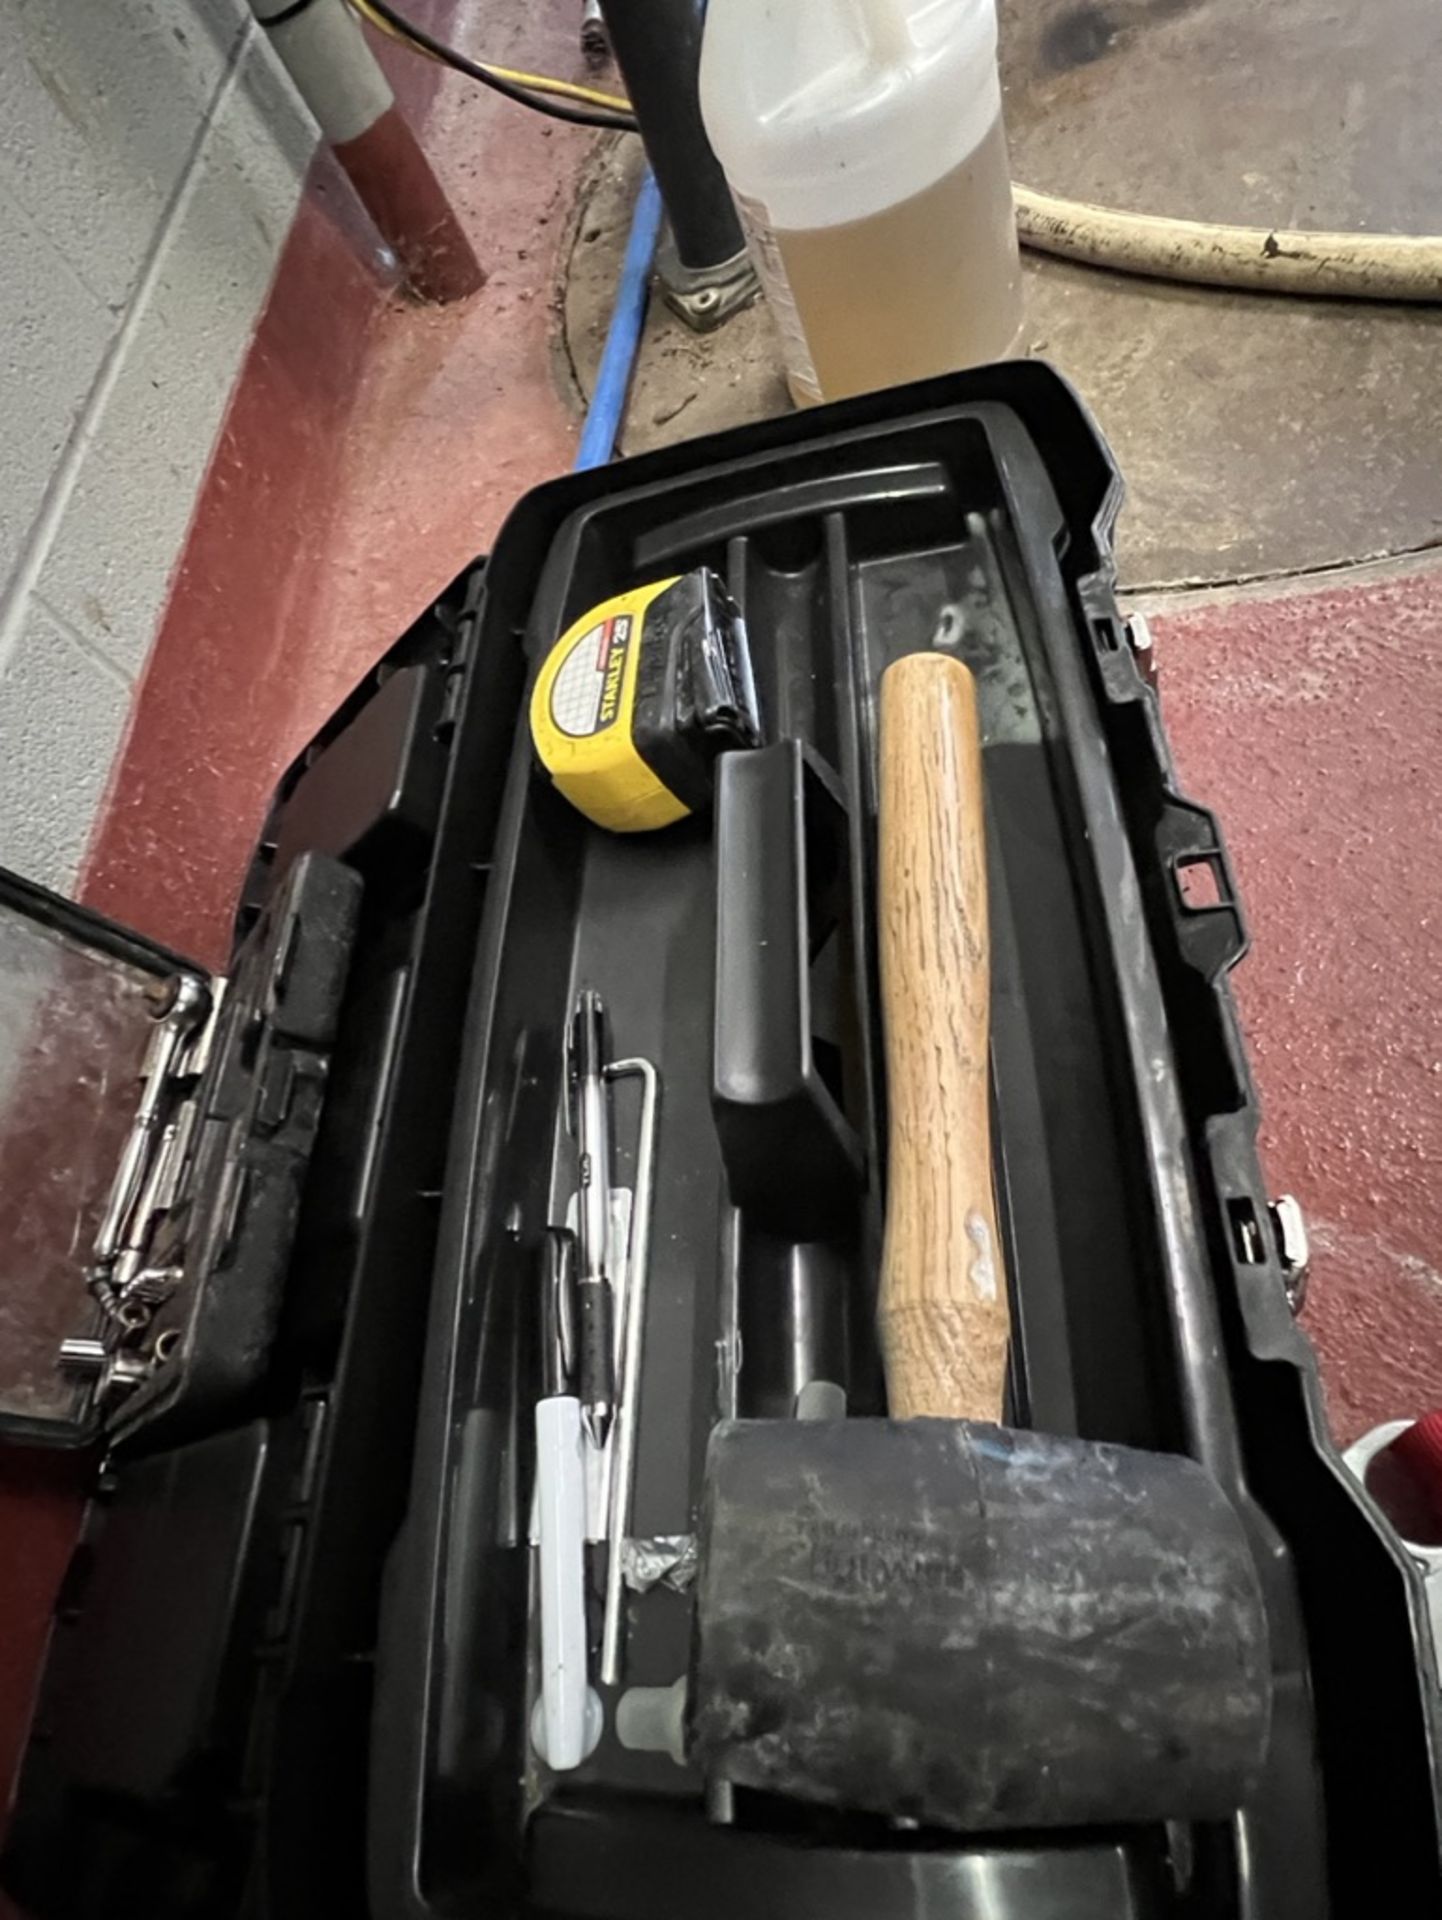 LOT OF: (2) PLASTIC TOOL BOXES, (1) METAL CRAFTSMAN TOOL BOX AND PICTURED SMALL TOOLS, DRILL BITS, - Image 11 of 15